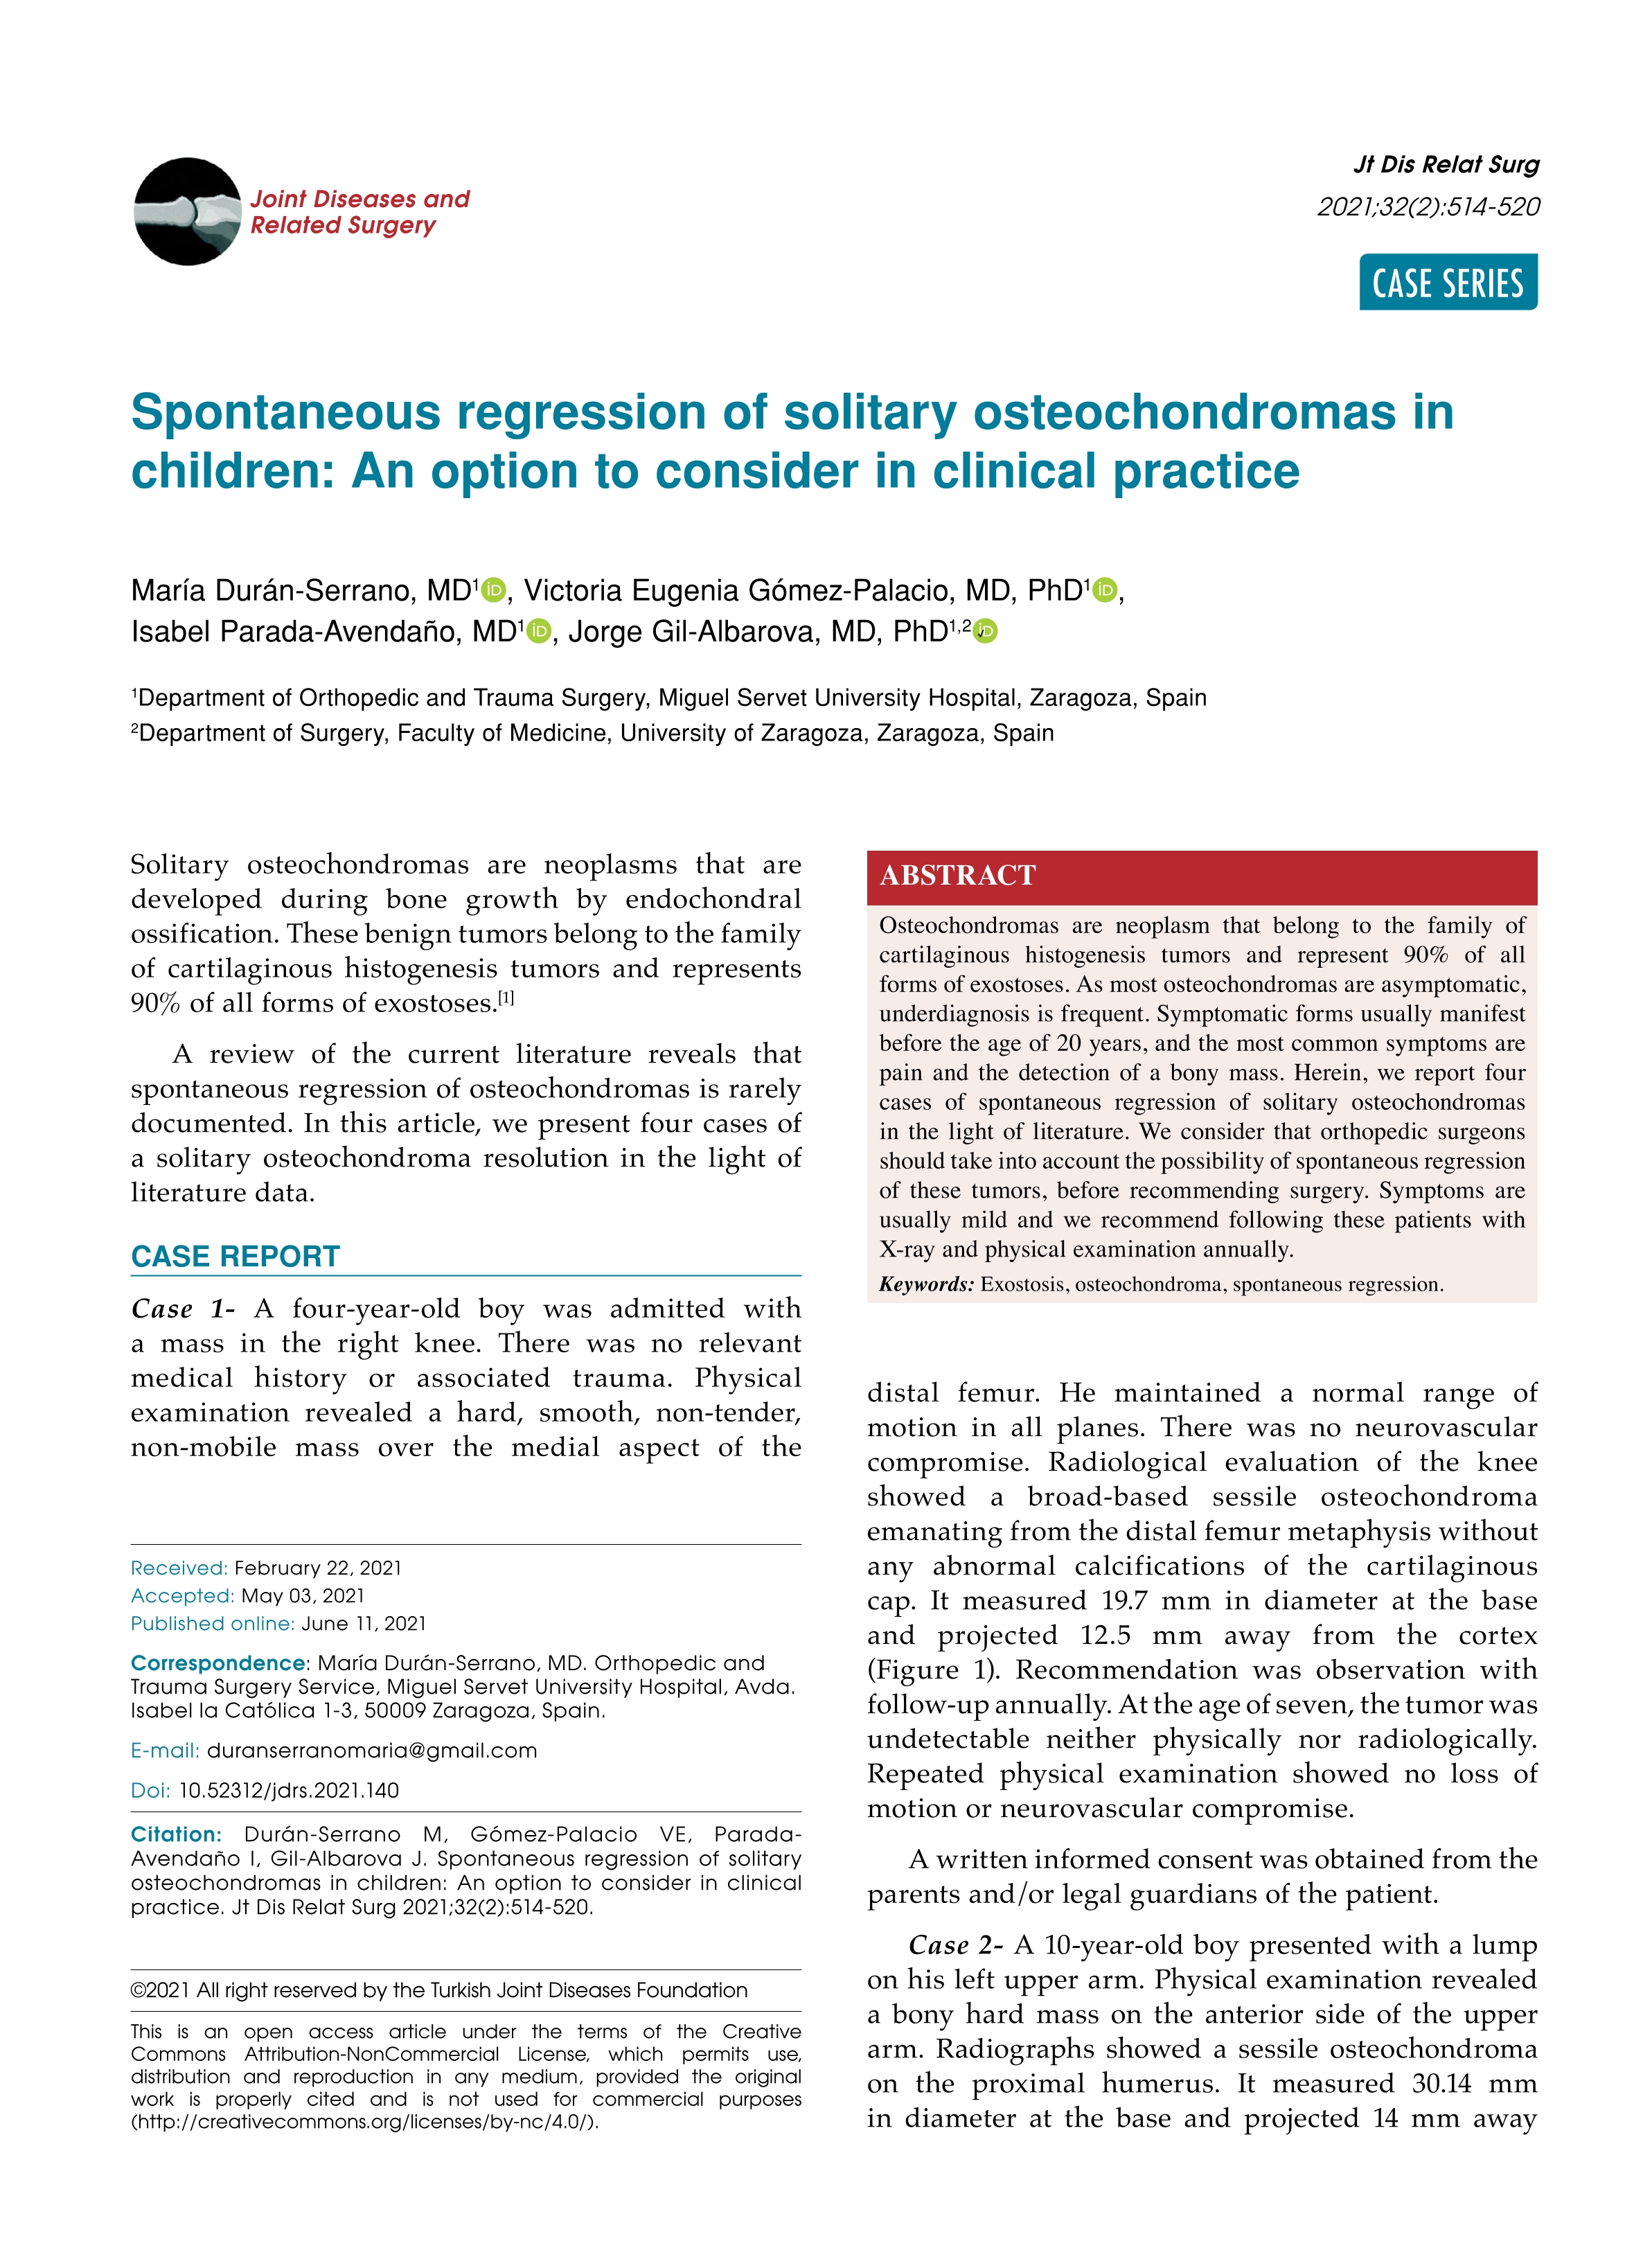 Spontaneous regression of solitary osteochondromas in children: An option to consider in clinical practice